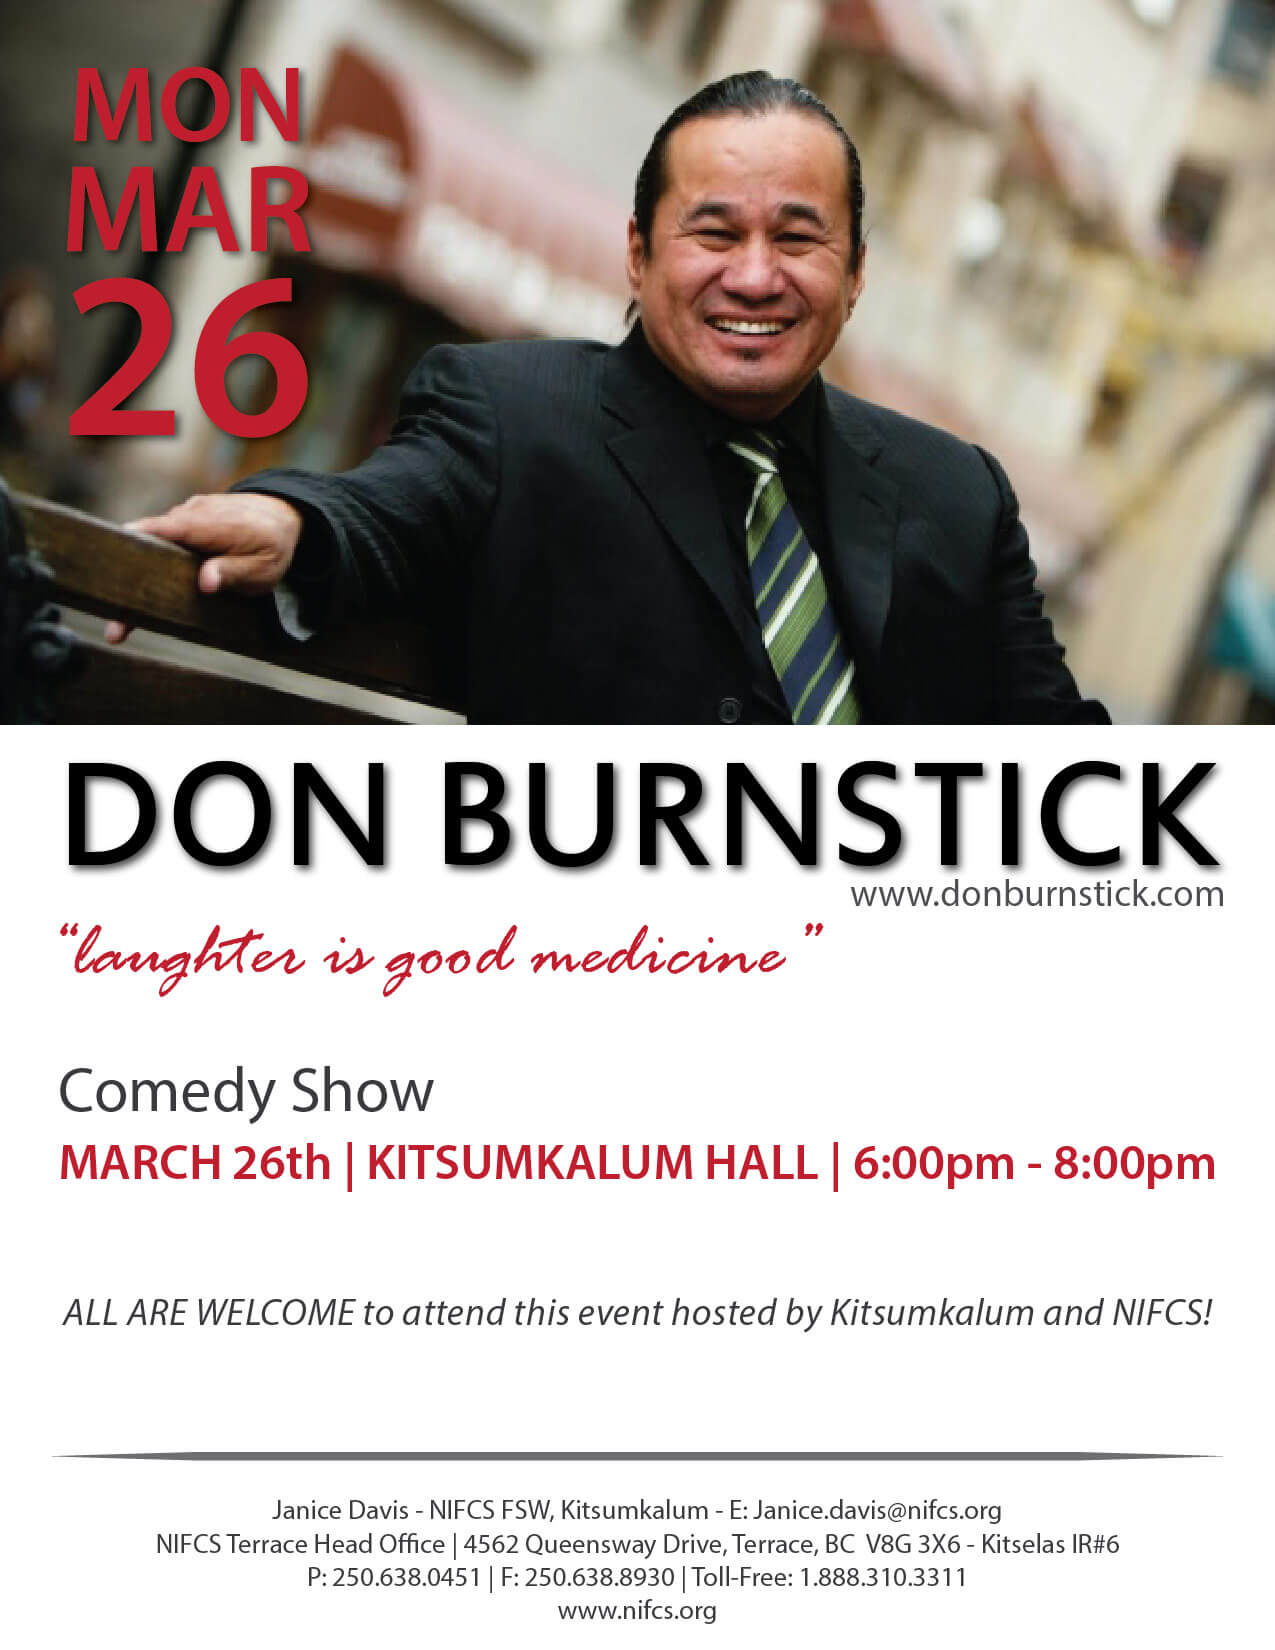 Don Burnstick Comedy Show March 26th